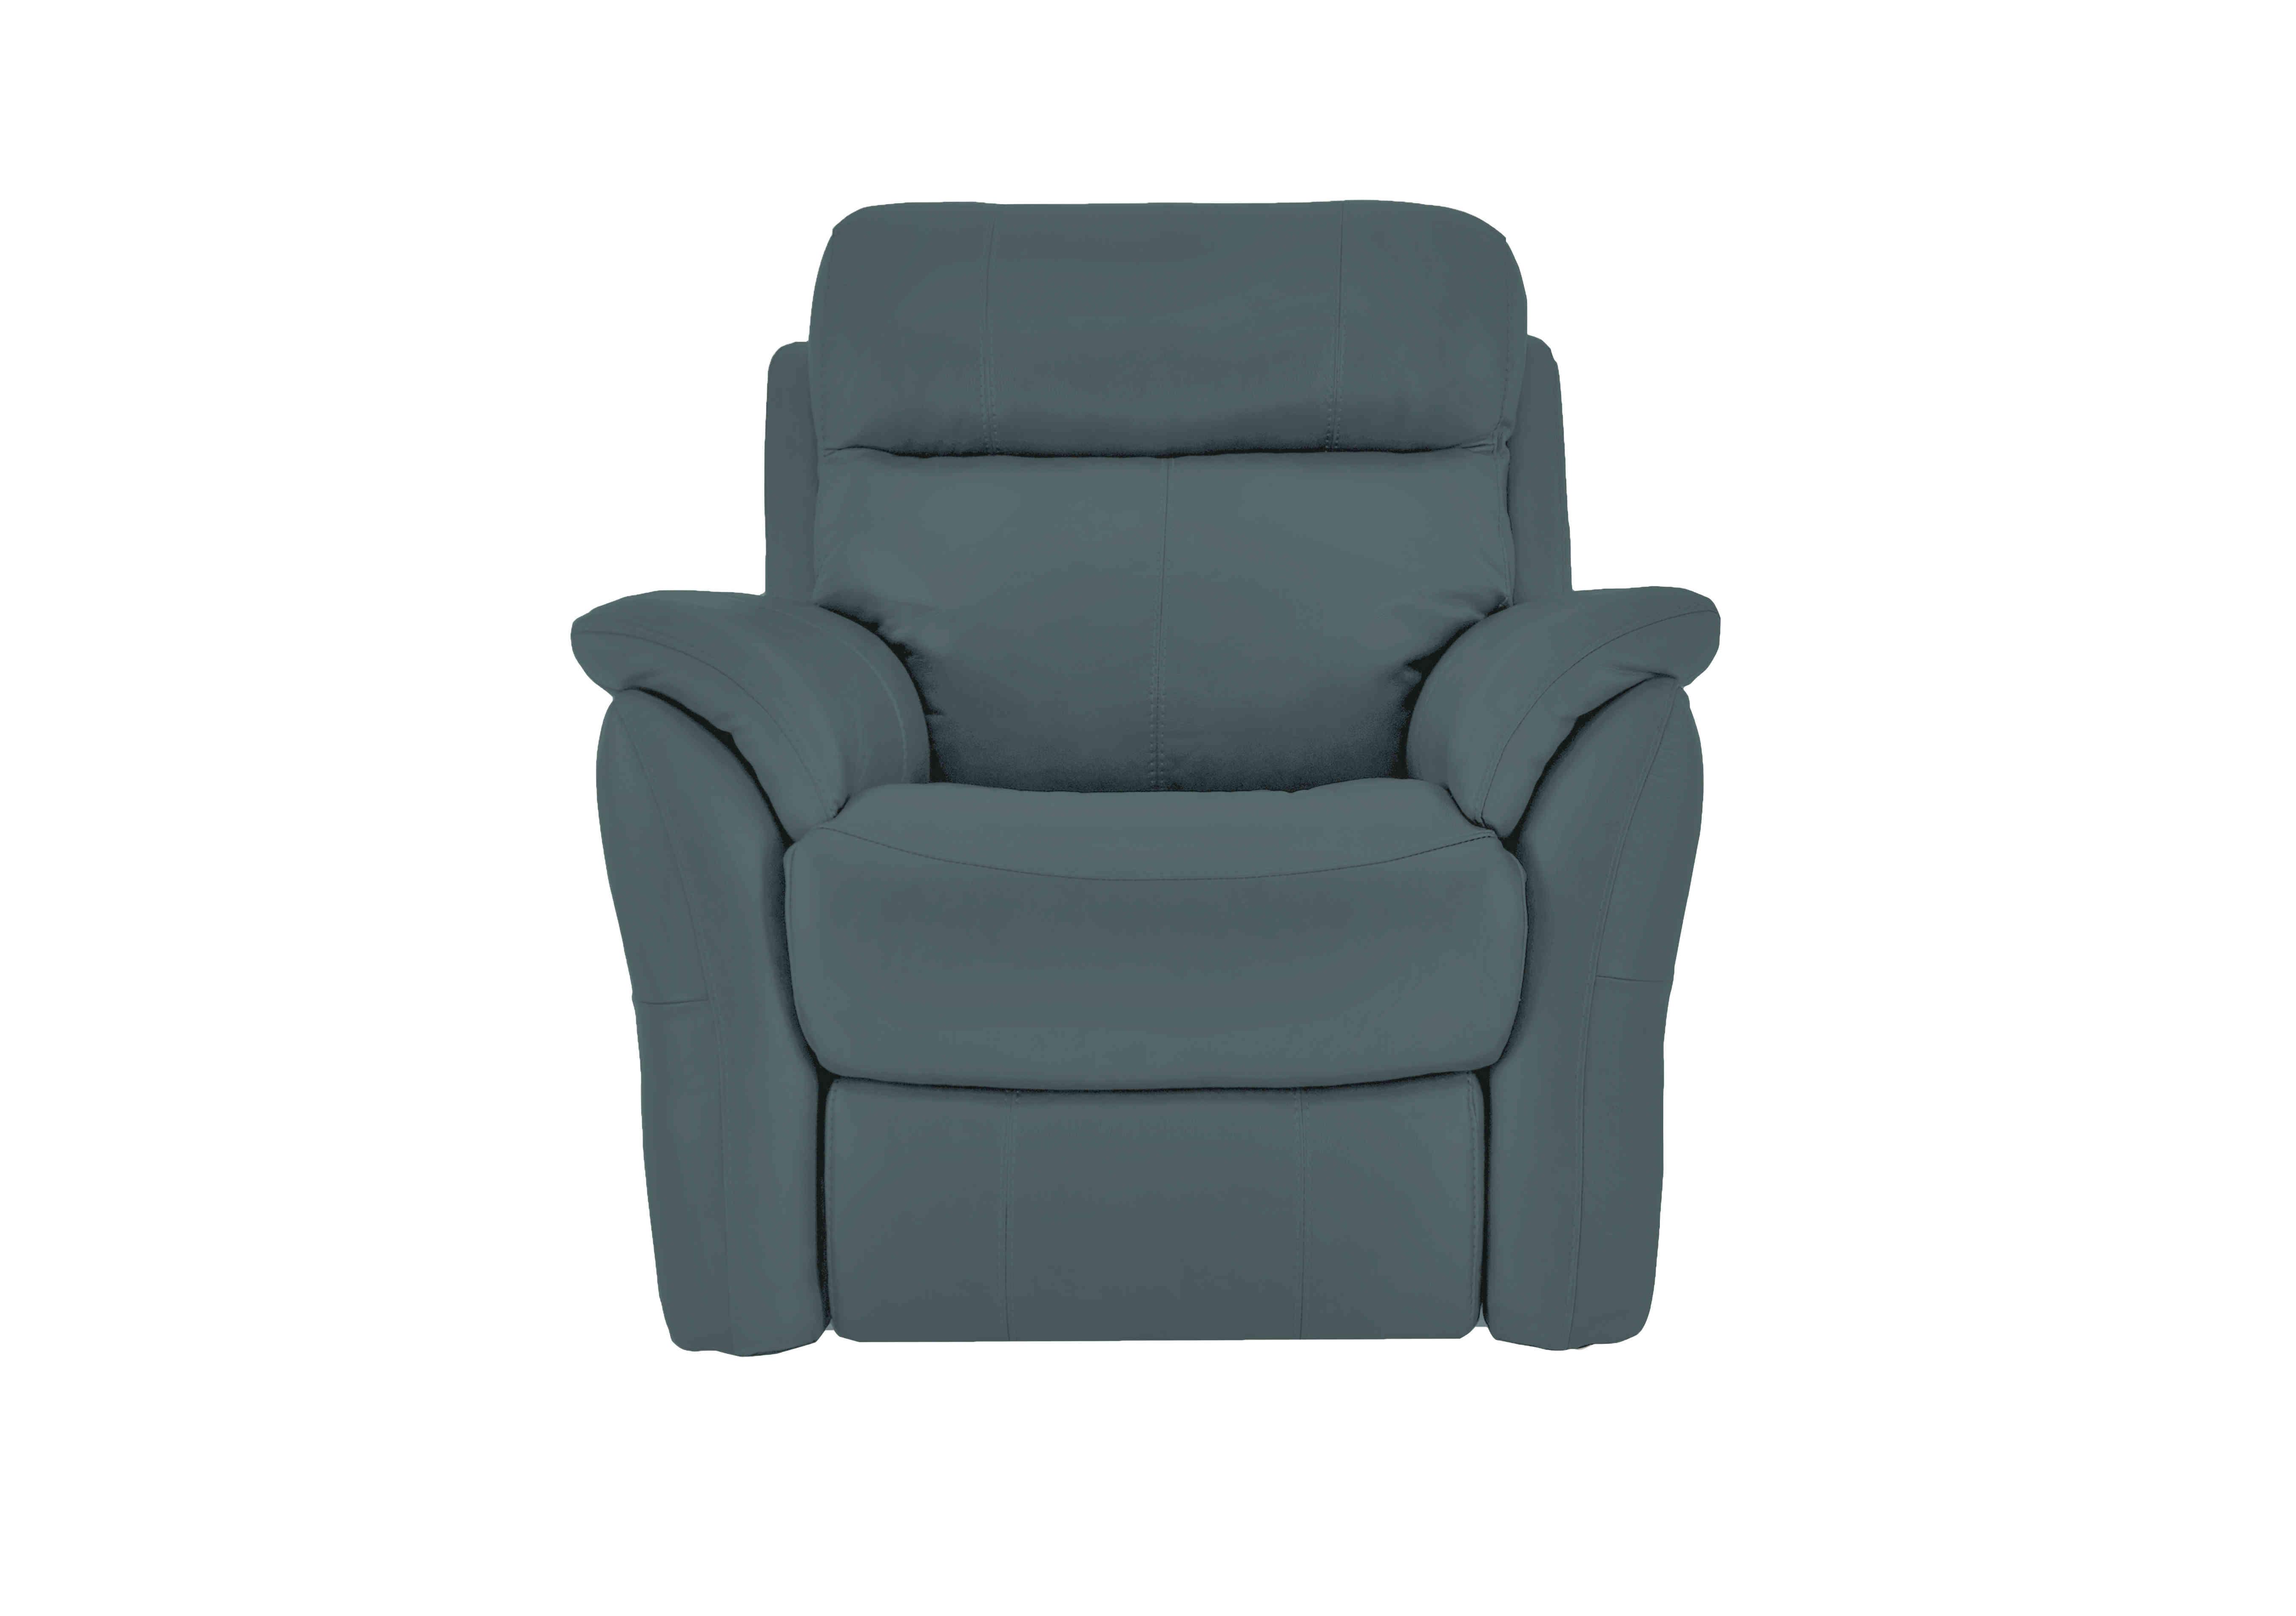 Relax Station Revive Leather Armchair in Bv-301e Lake Green on Furniture Village